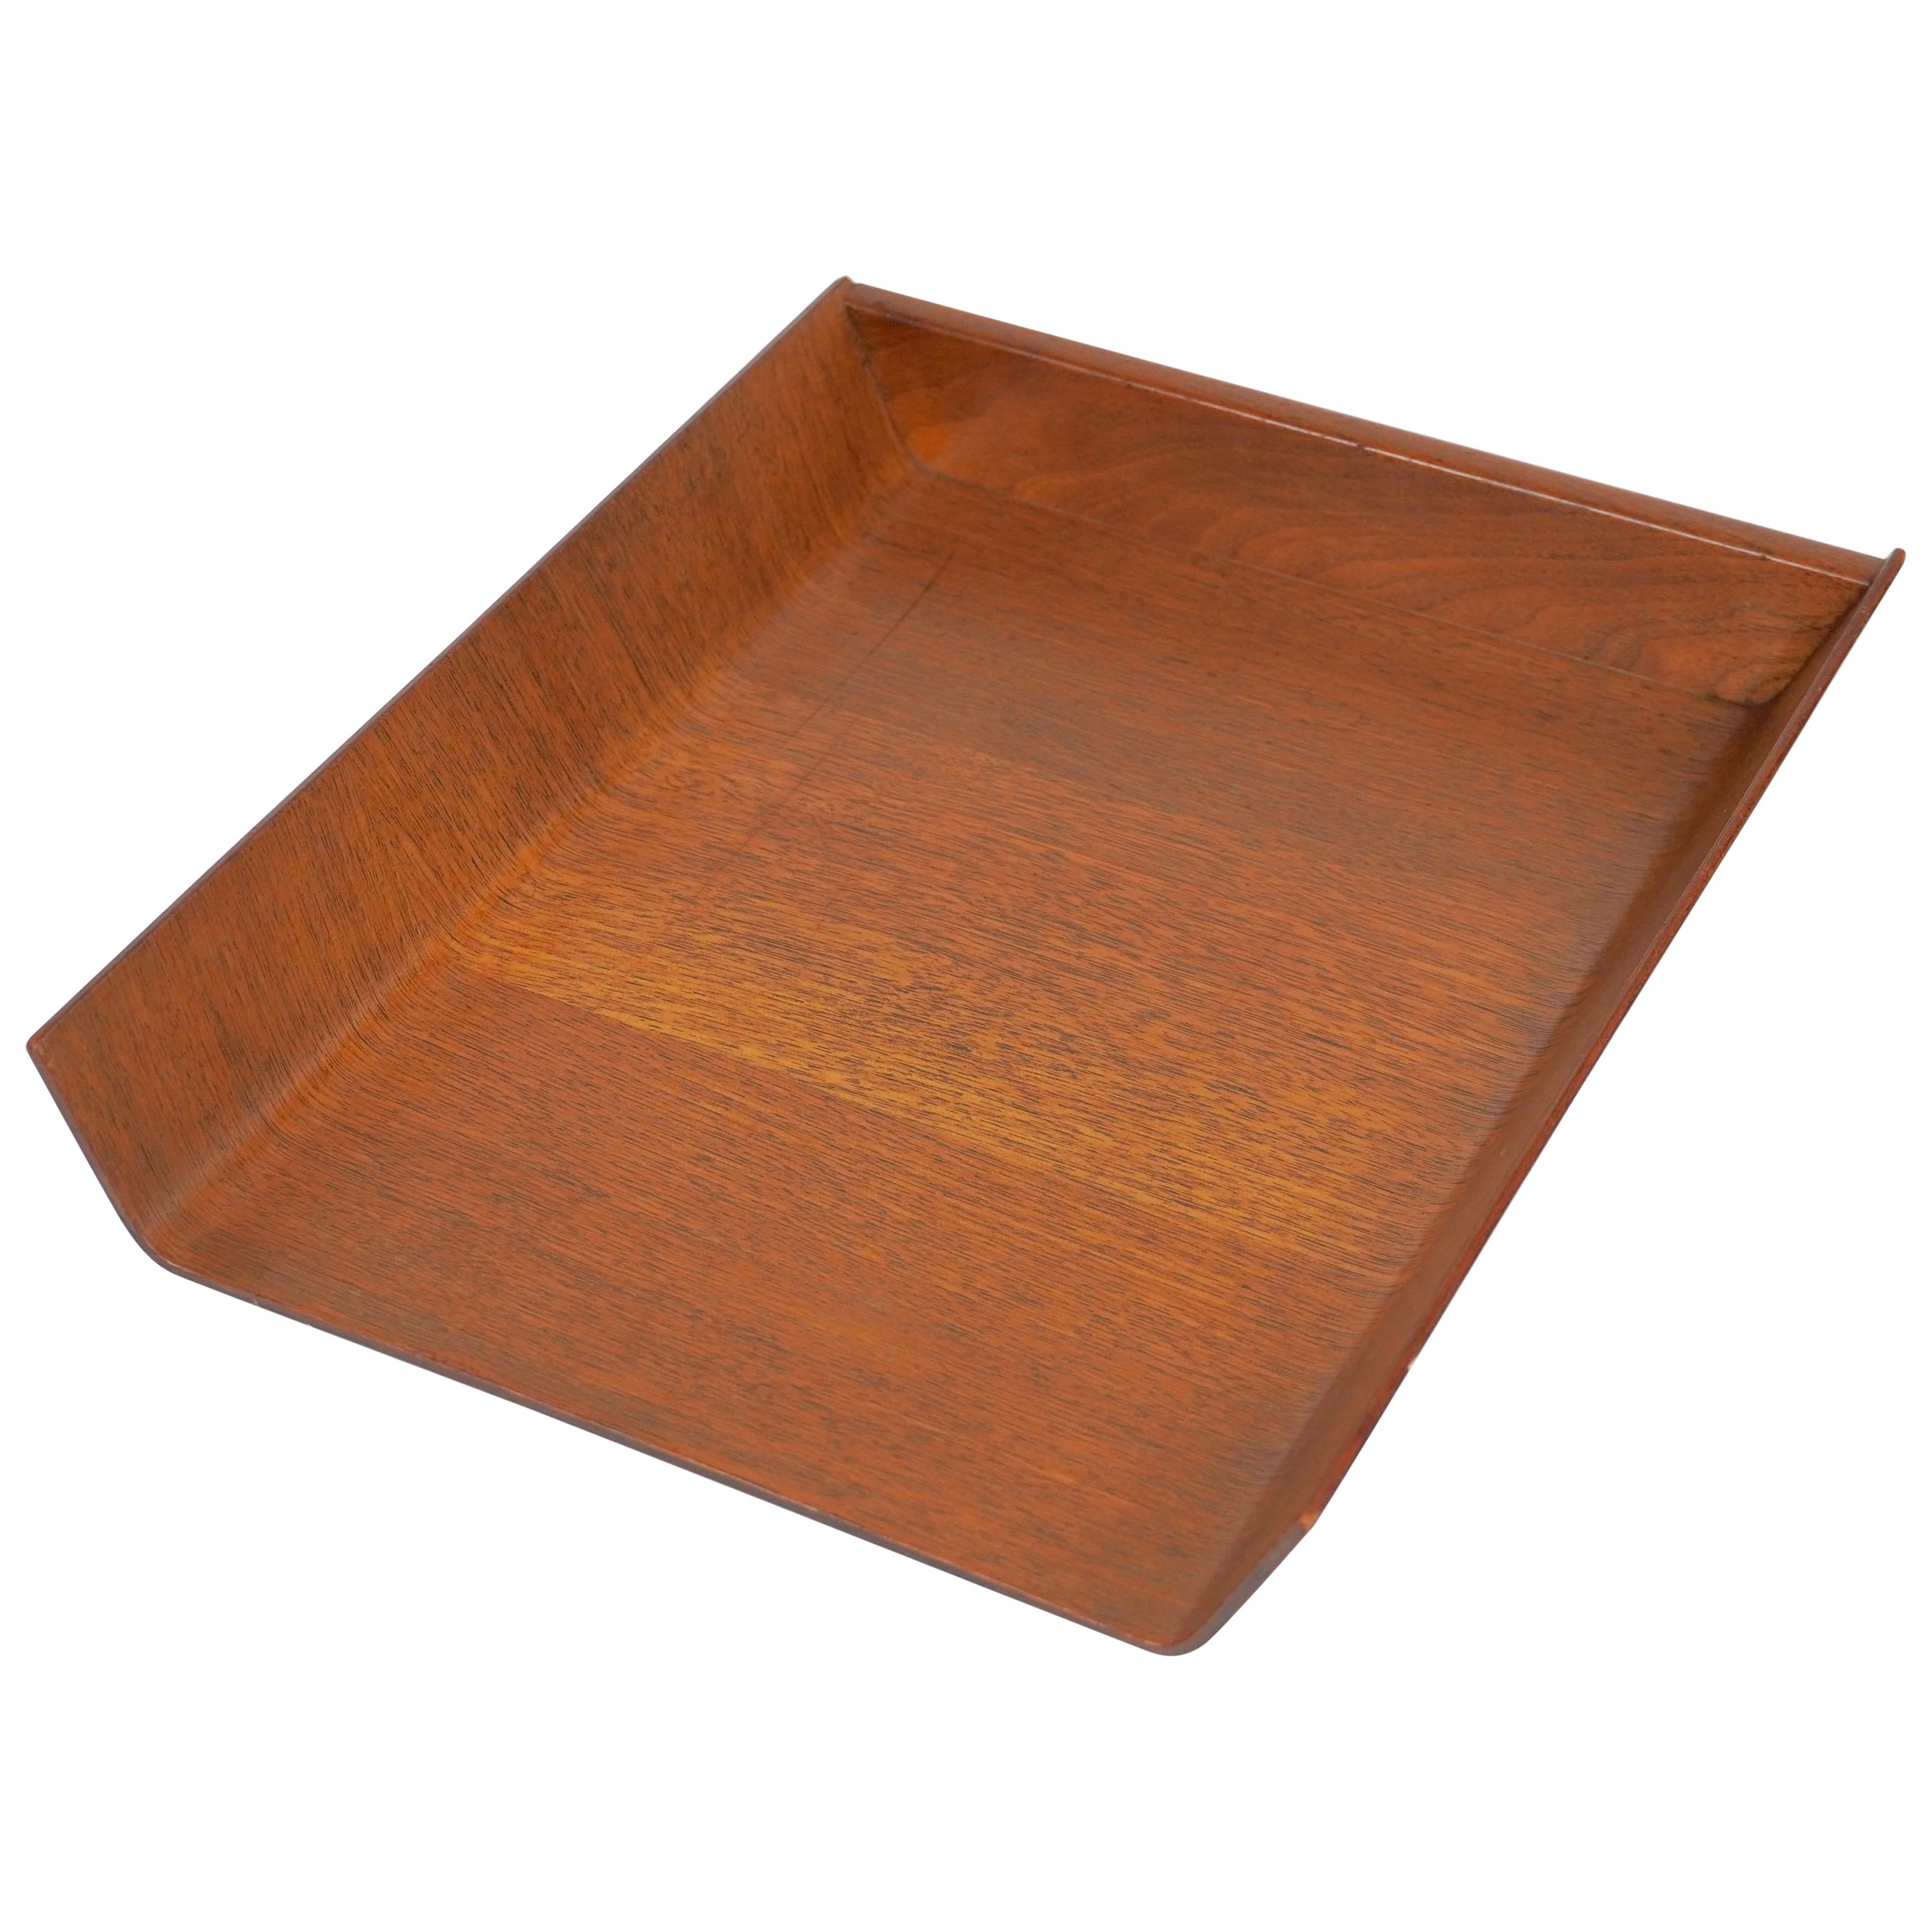 Florence Knoll Walnut Plywood Letter Tray, Office Desk Accessory